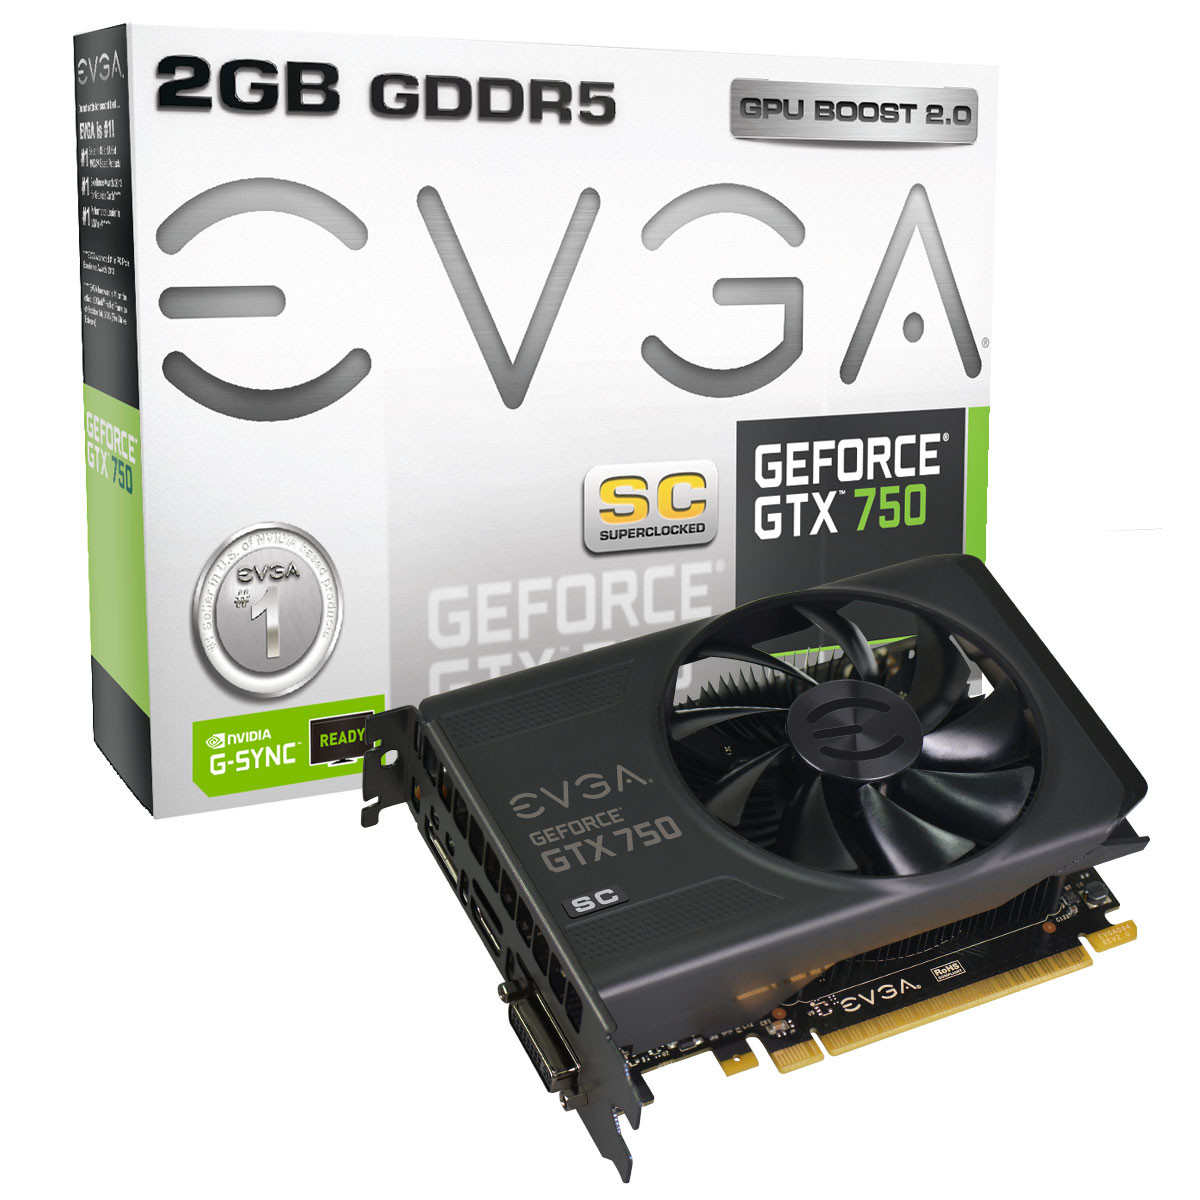 Media asset in full size related to 3dfxzone.it news item entitled as follows: EVGA lancia due GeForce GTX 750 con un frame buffer da 2GB | Image Name: news20852_EVGA-GeForce-GTX-750-2GB_4.jpg